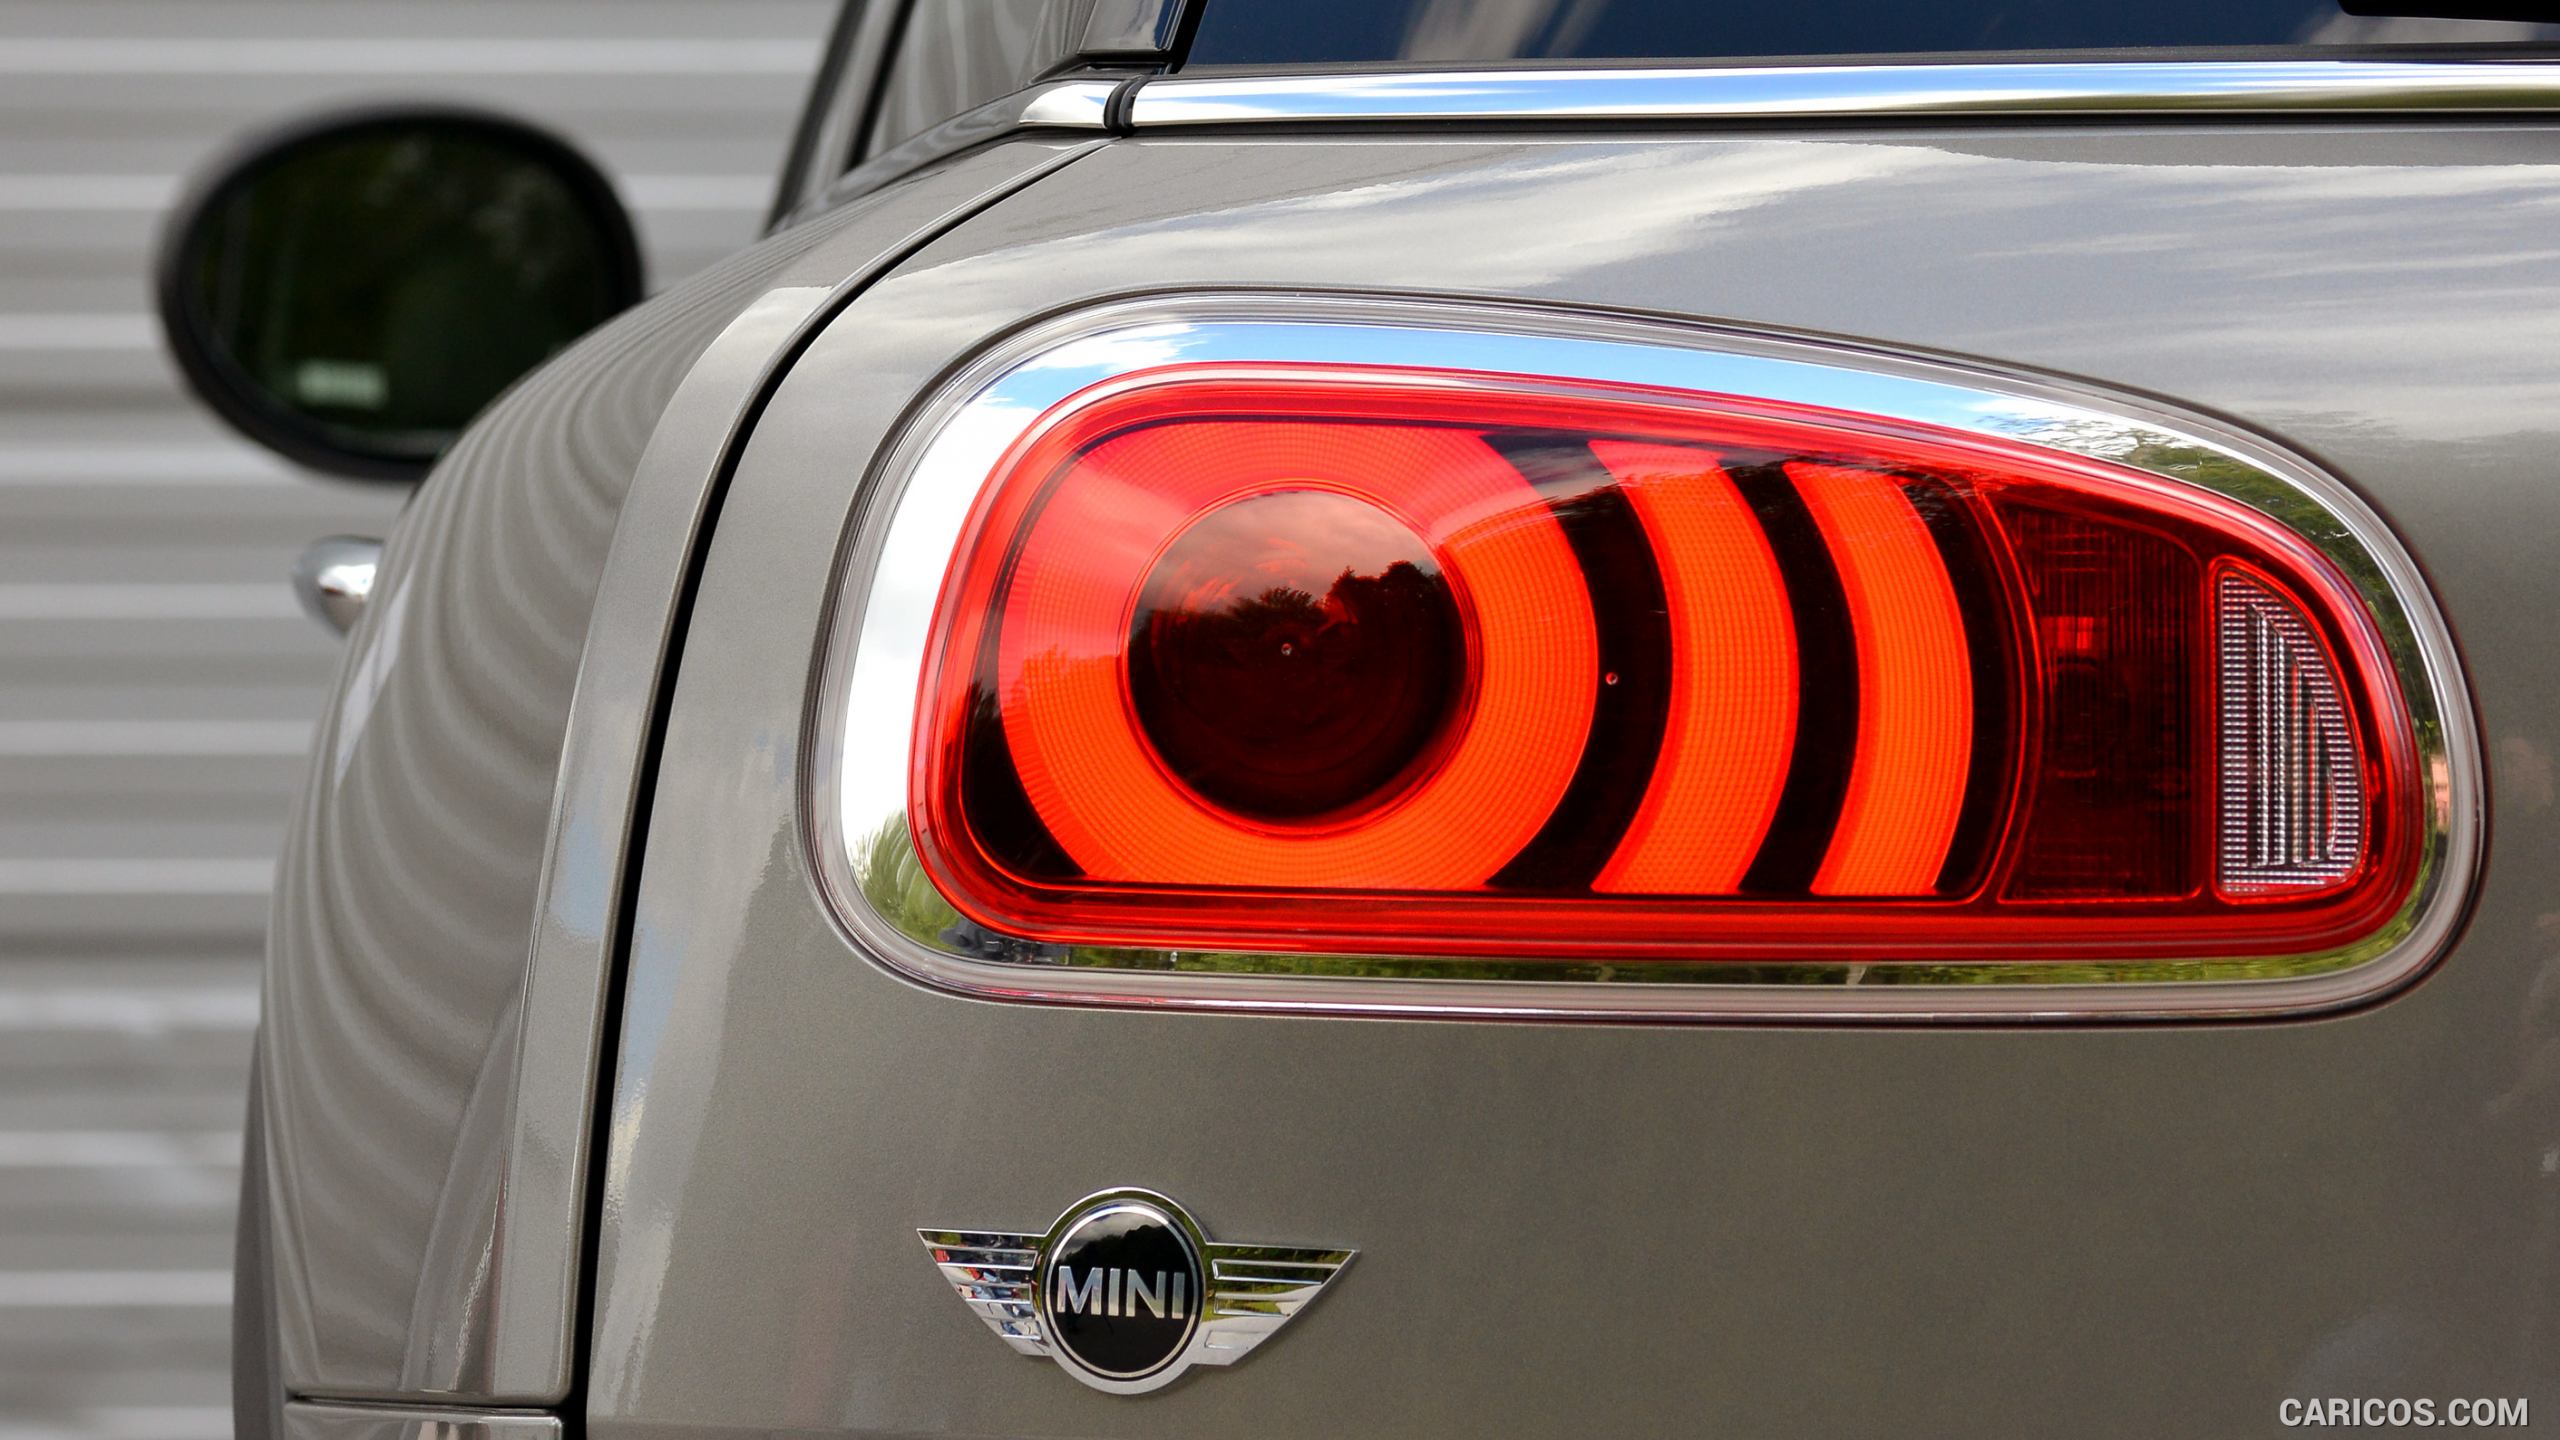 2016 MINI Cooper S Clubman in Metallic Melting Silver - Tail Light, #211 of 380